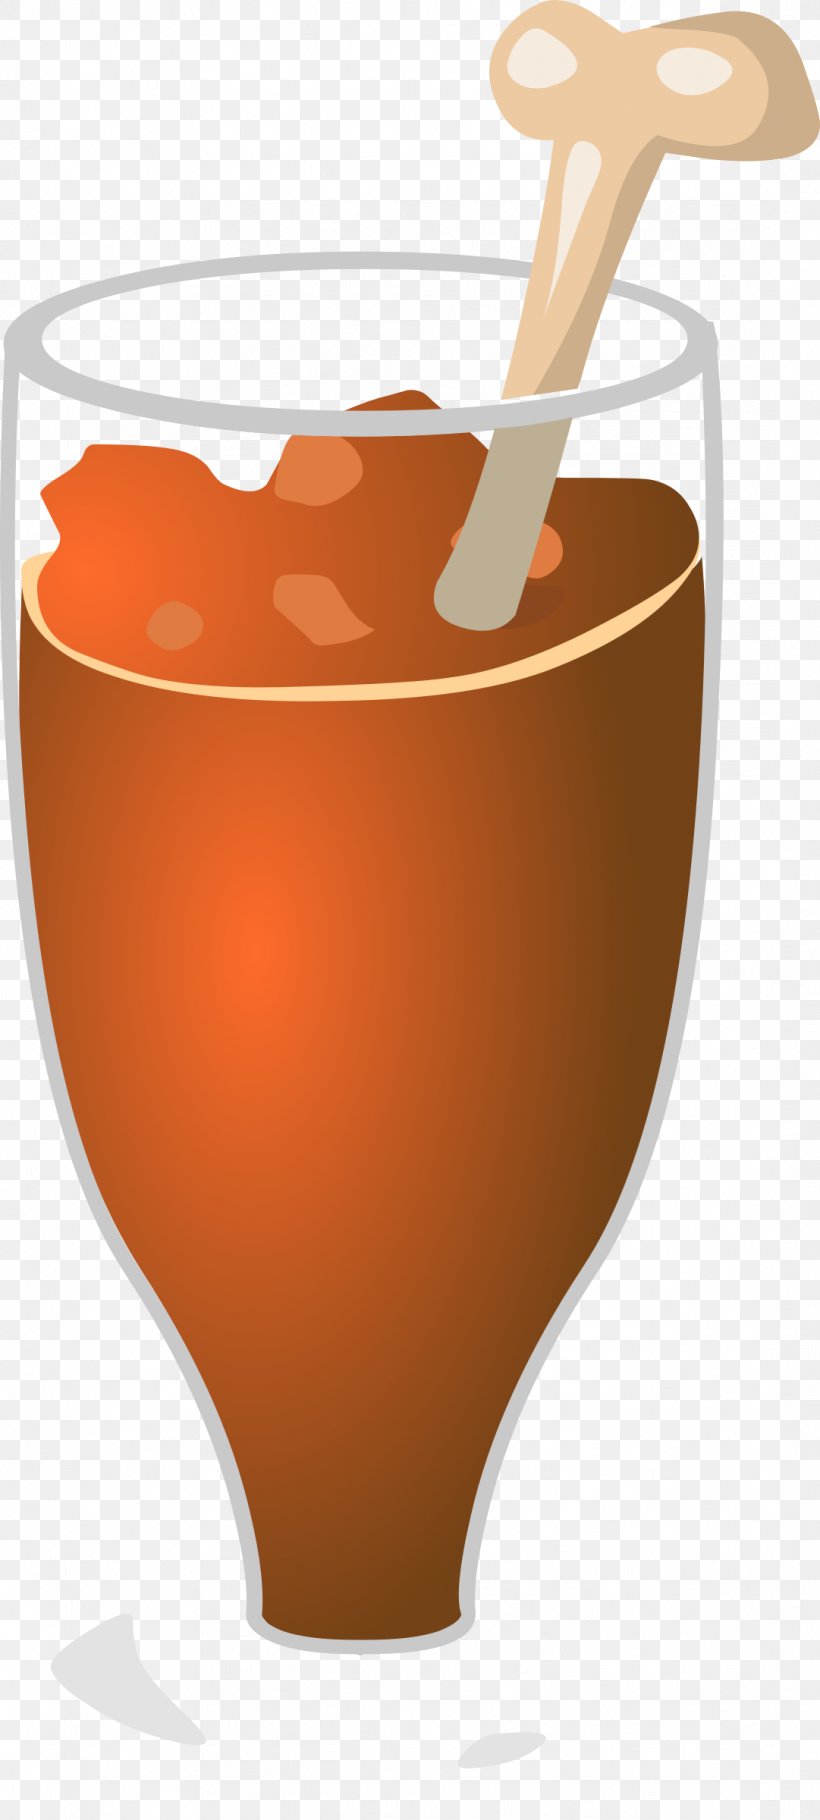 Smoothie Milkshake Health Shake Sloe Gin Drink, PNG, 1081x2400px, Smoothie, Alcoholic Drink, Chocolate, Coffee Cup, Cup Download Free